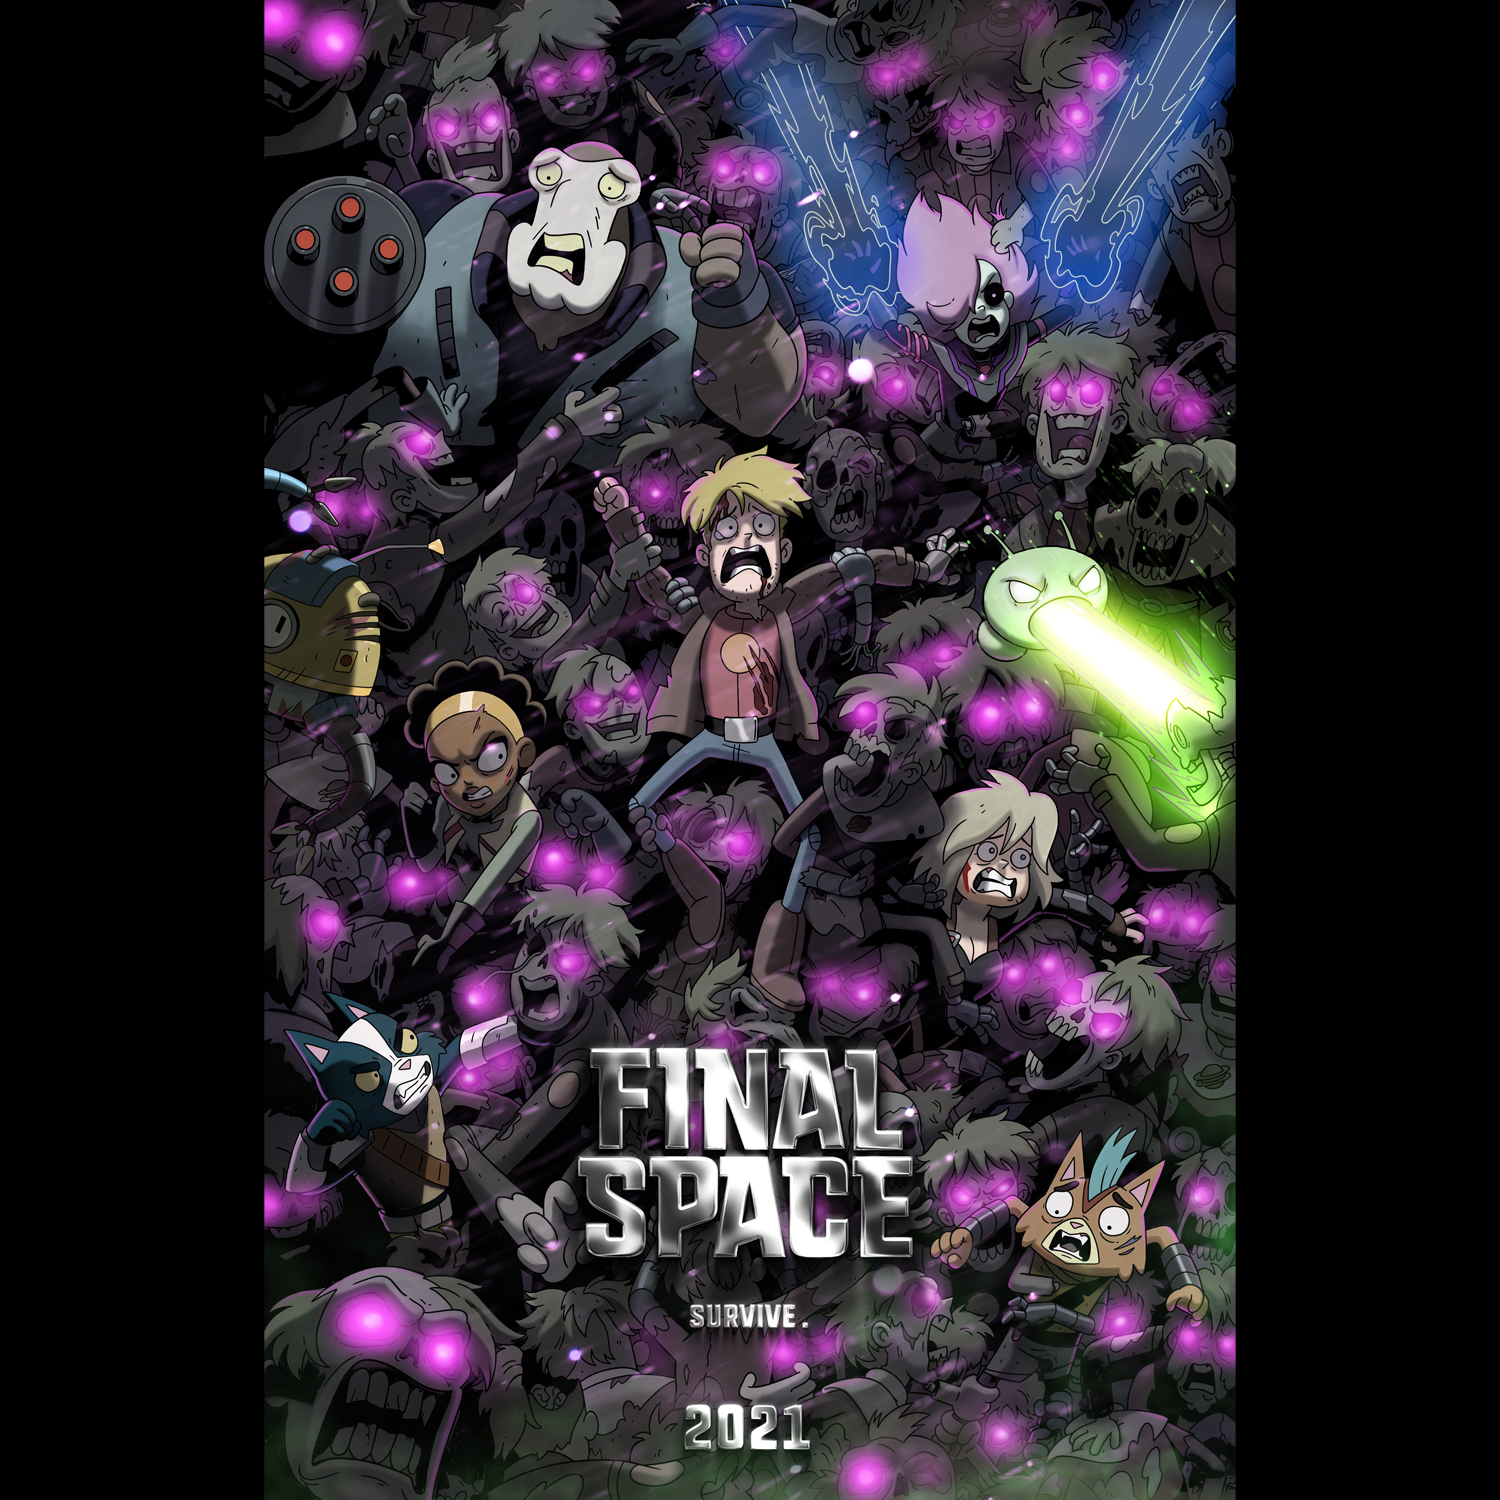 Final Space on Twitter: "Screw it, why wait! HERE IT IS! The #FinalSpace  Season 3 Teaser Poster! Coming 2021 🔥 -Olan (Poster by @devinator200, Gen  Wolfe, Kristina Giblin, and Matt Lara)… https://t.co/QlO77vzgzf"